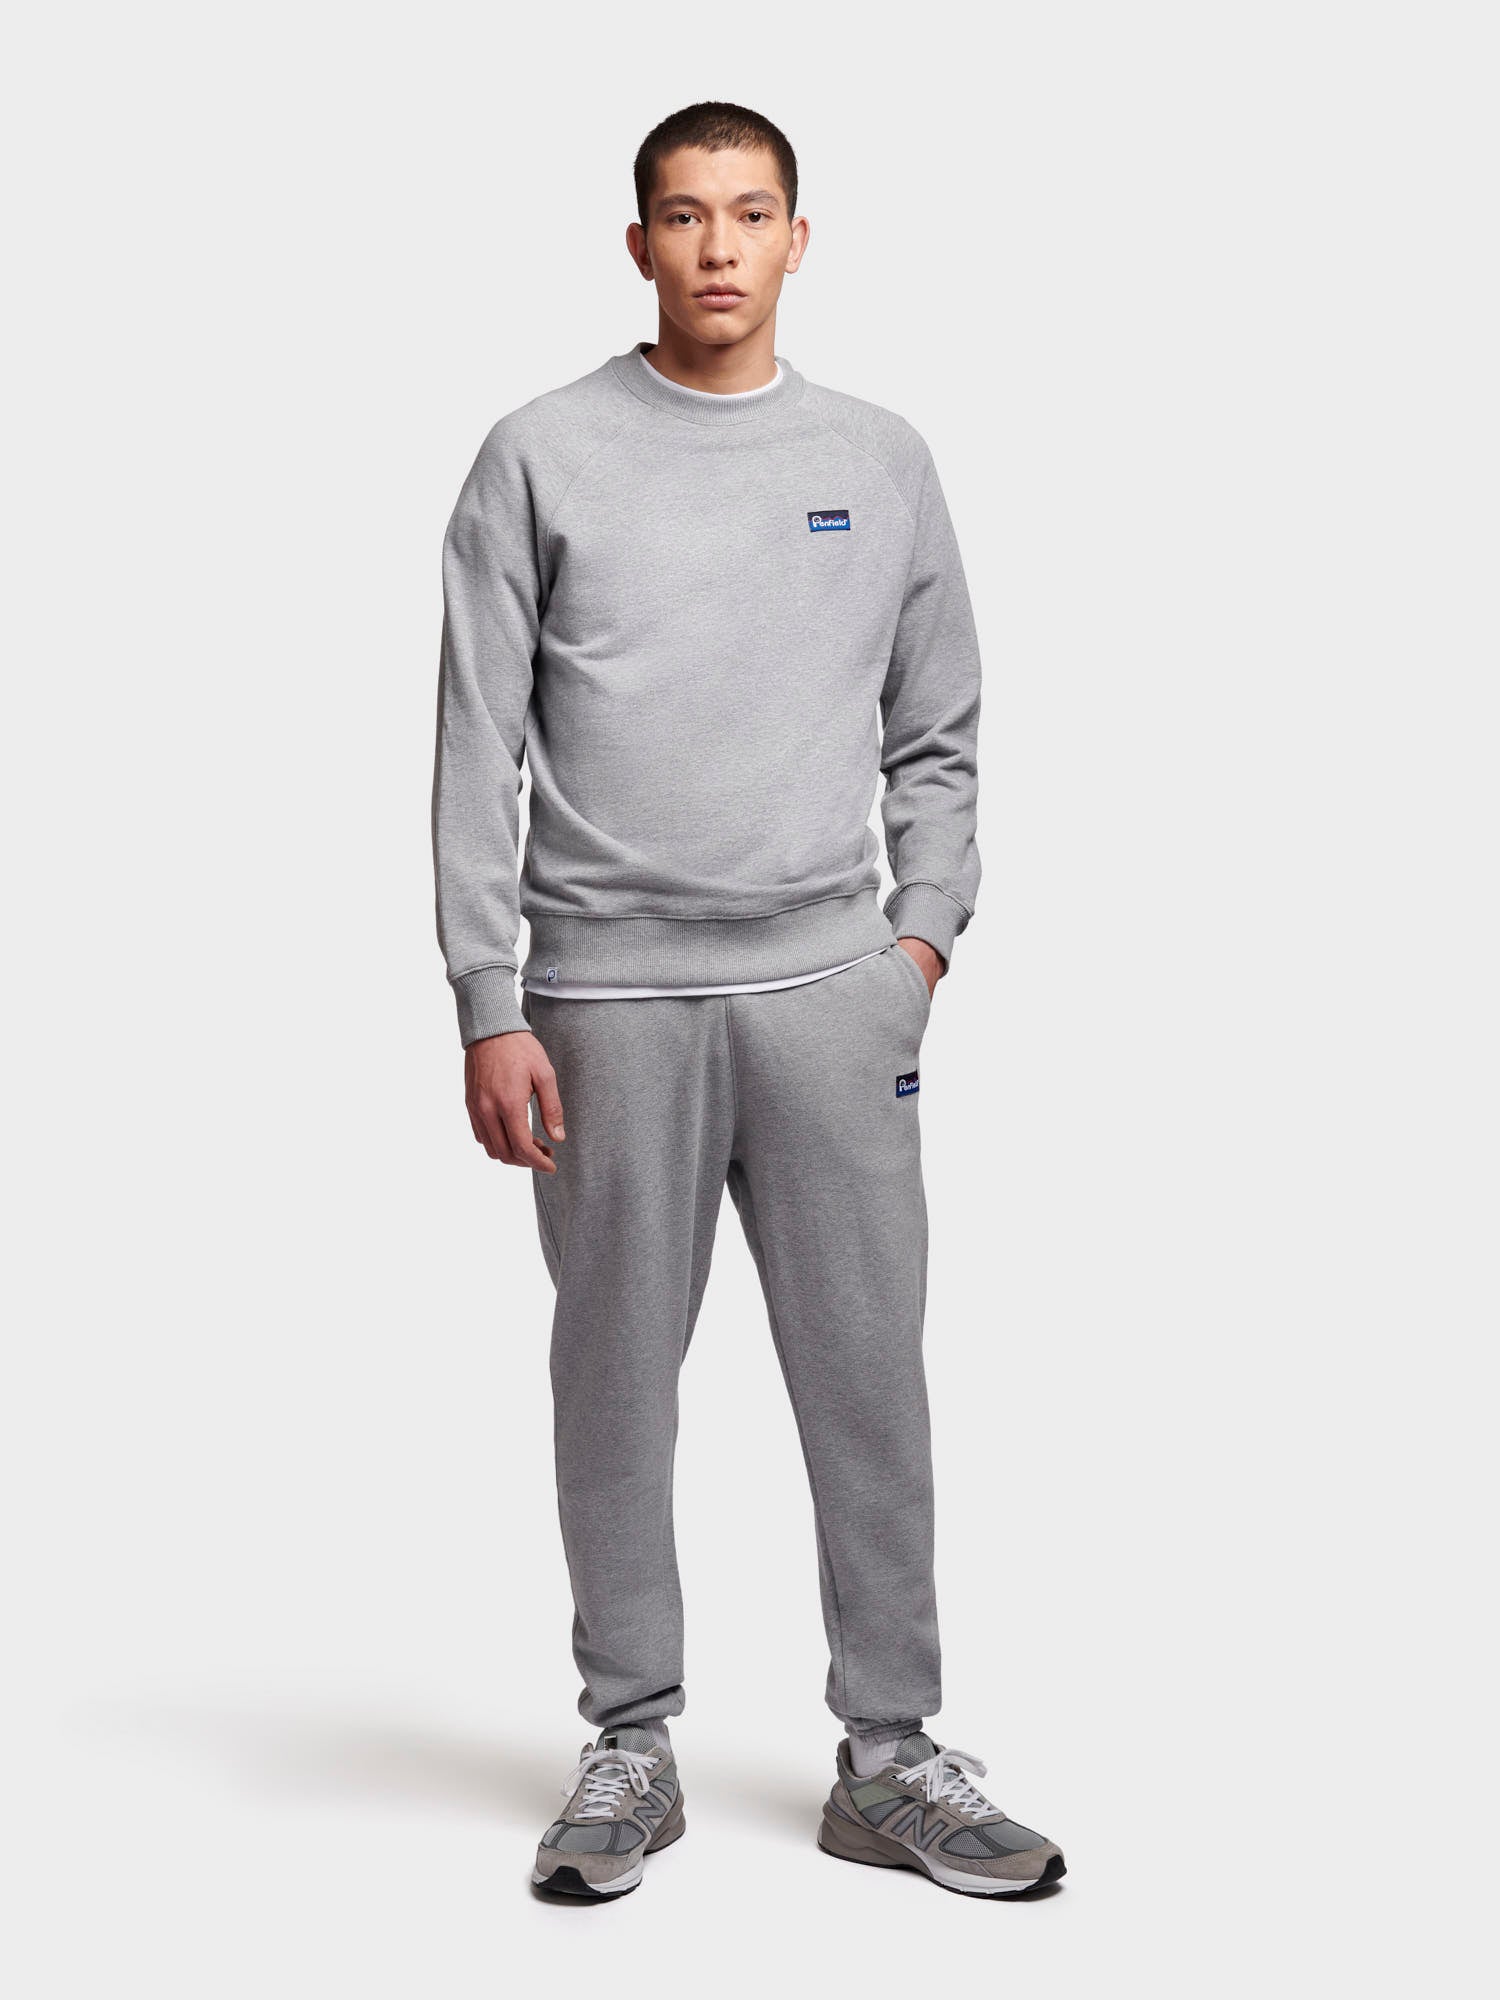 Relaxed Fit Original Logo Joggers in Athletic Grey Heather